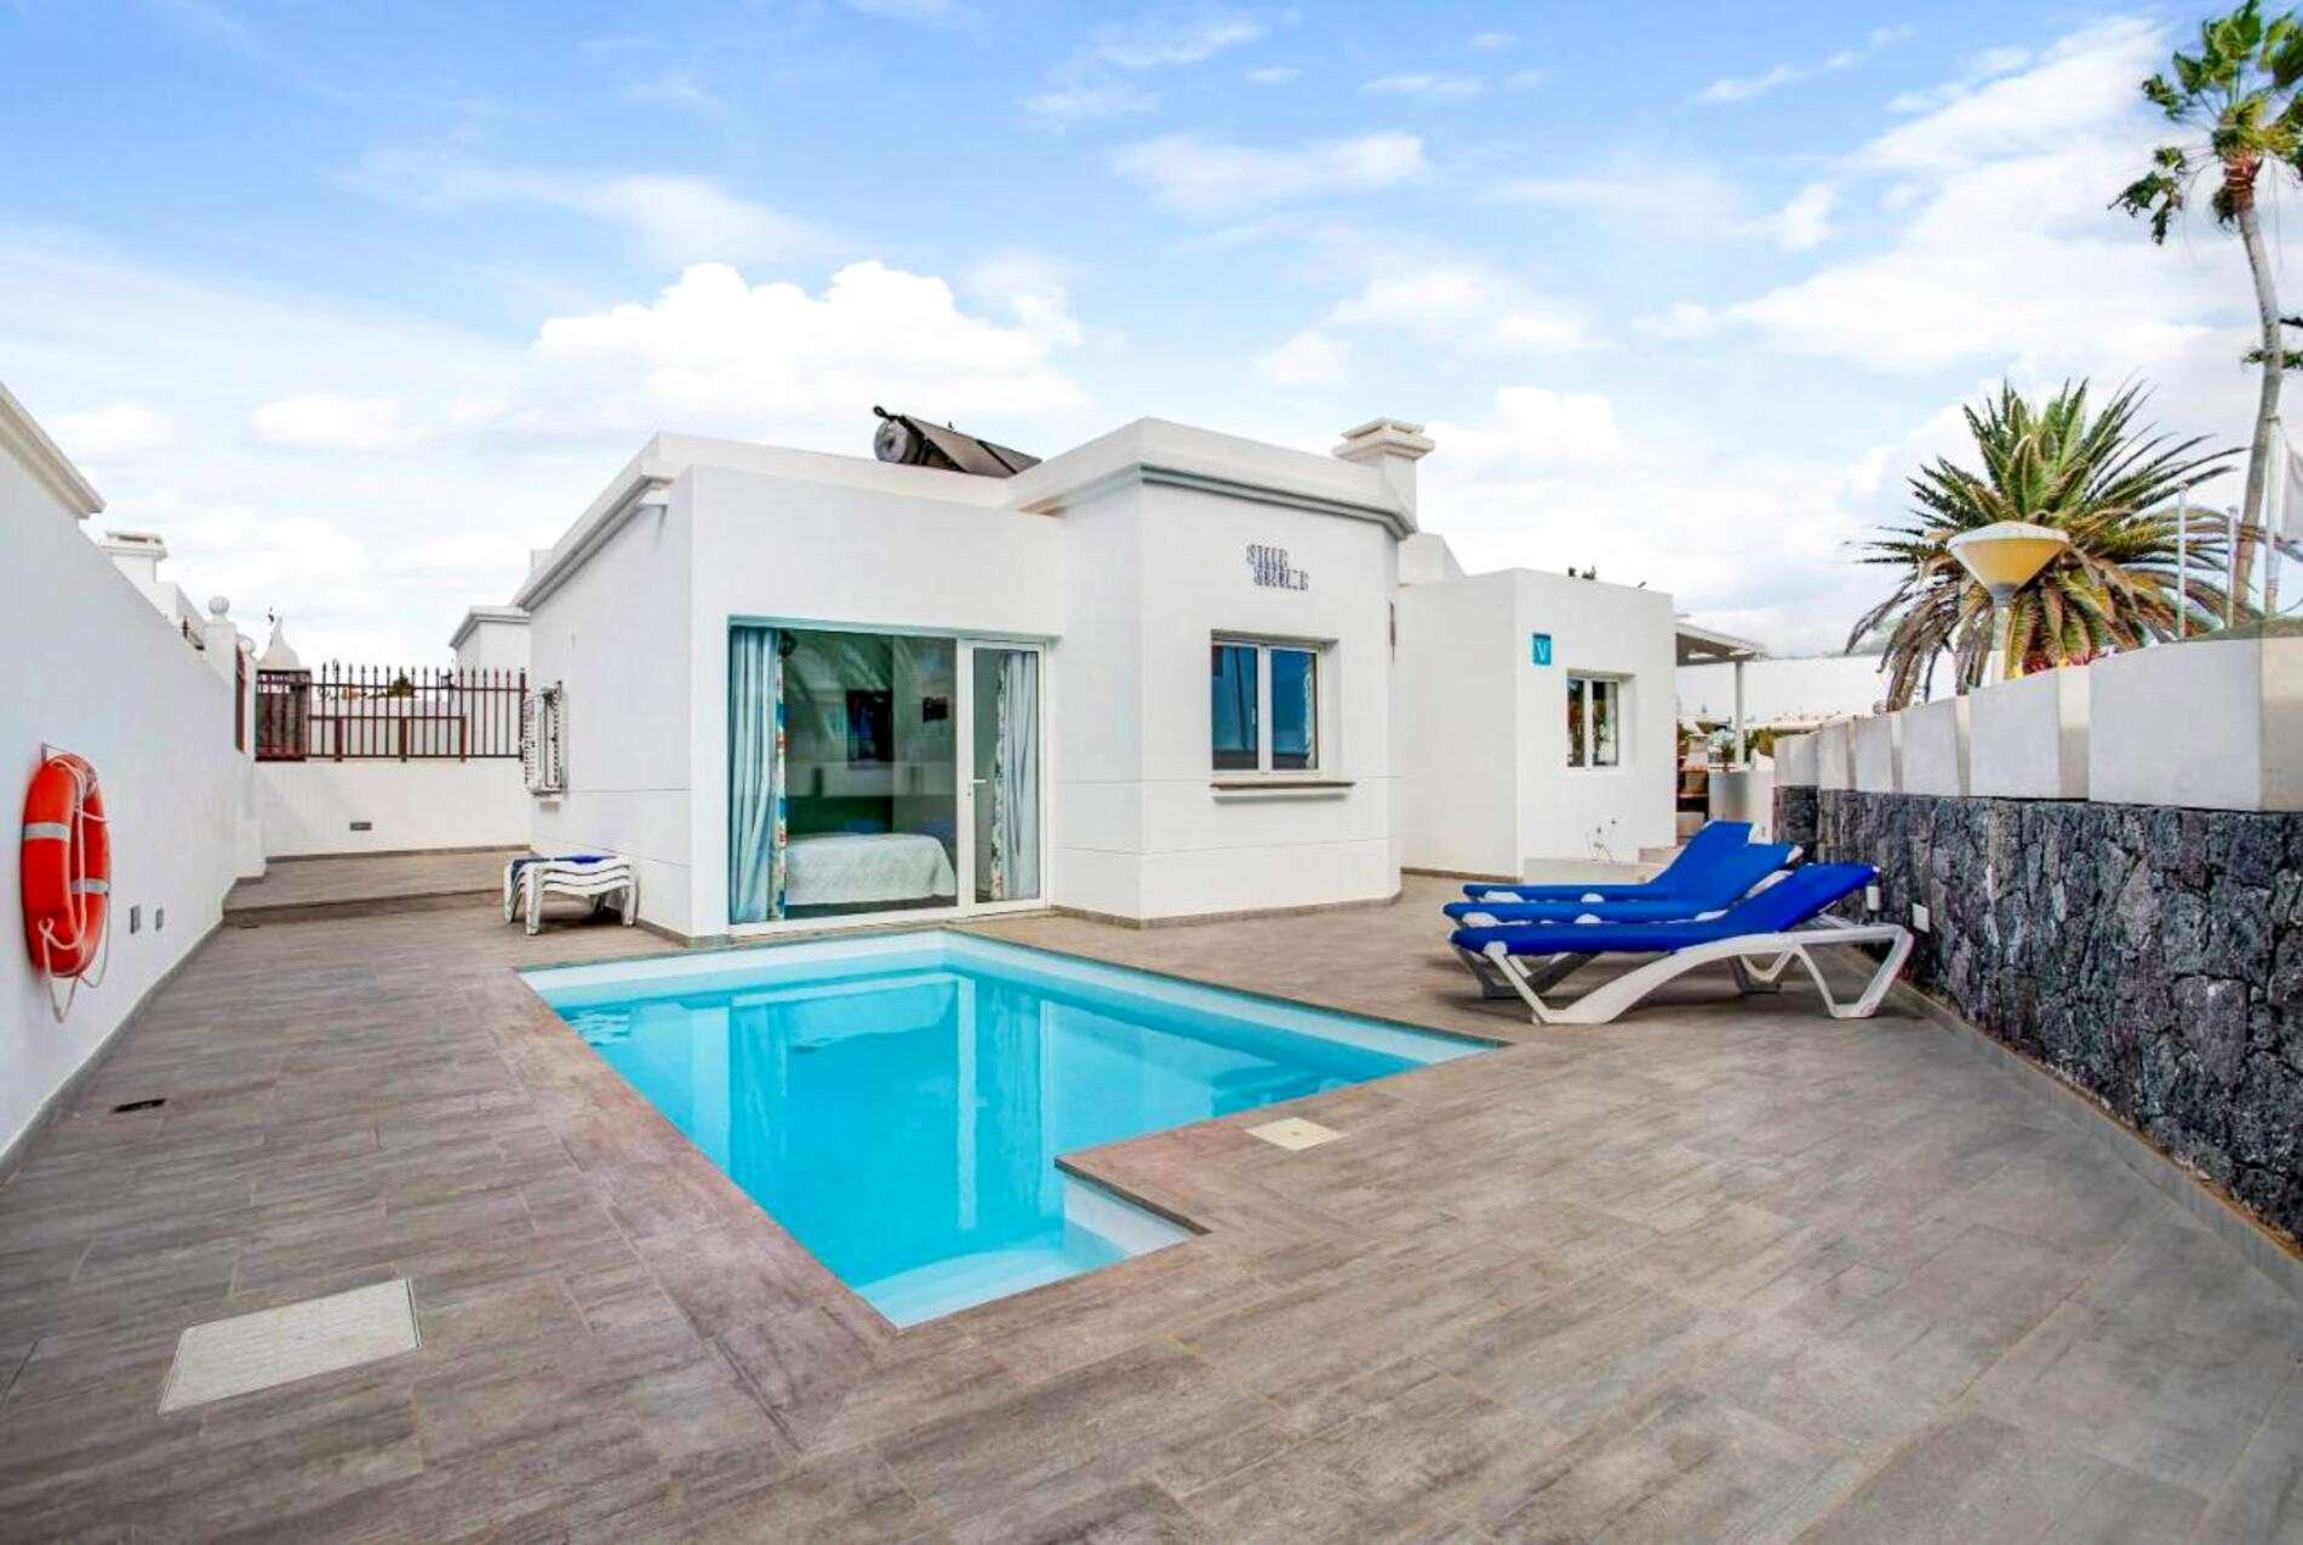 Property Image 1 - Villa w/pool, close to a beach and amenities.